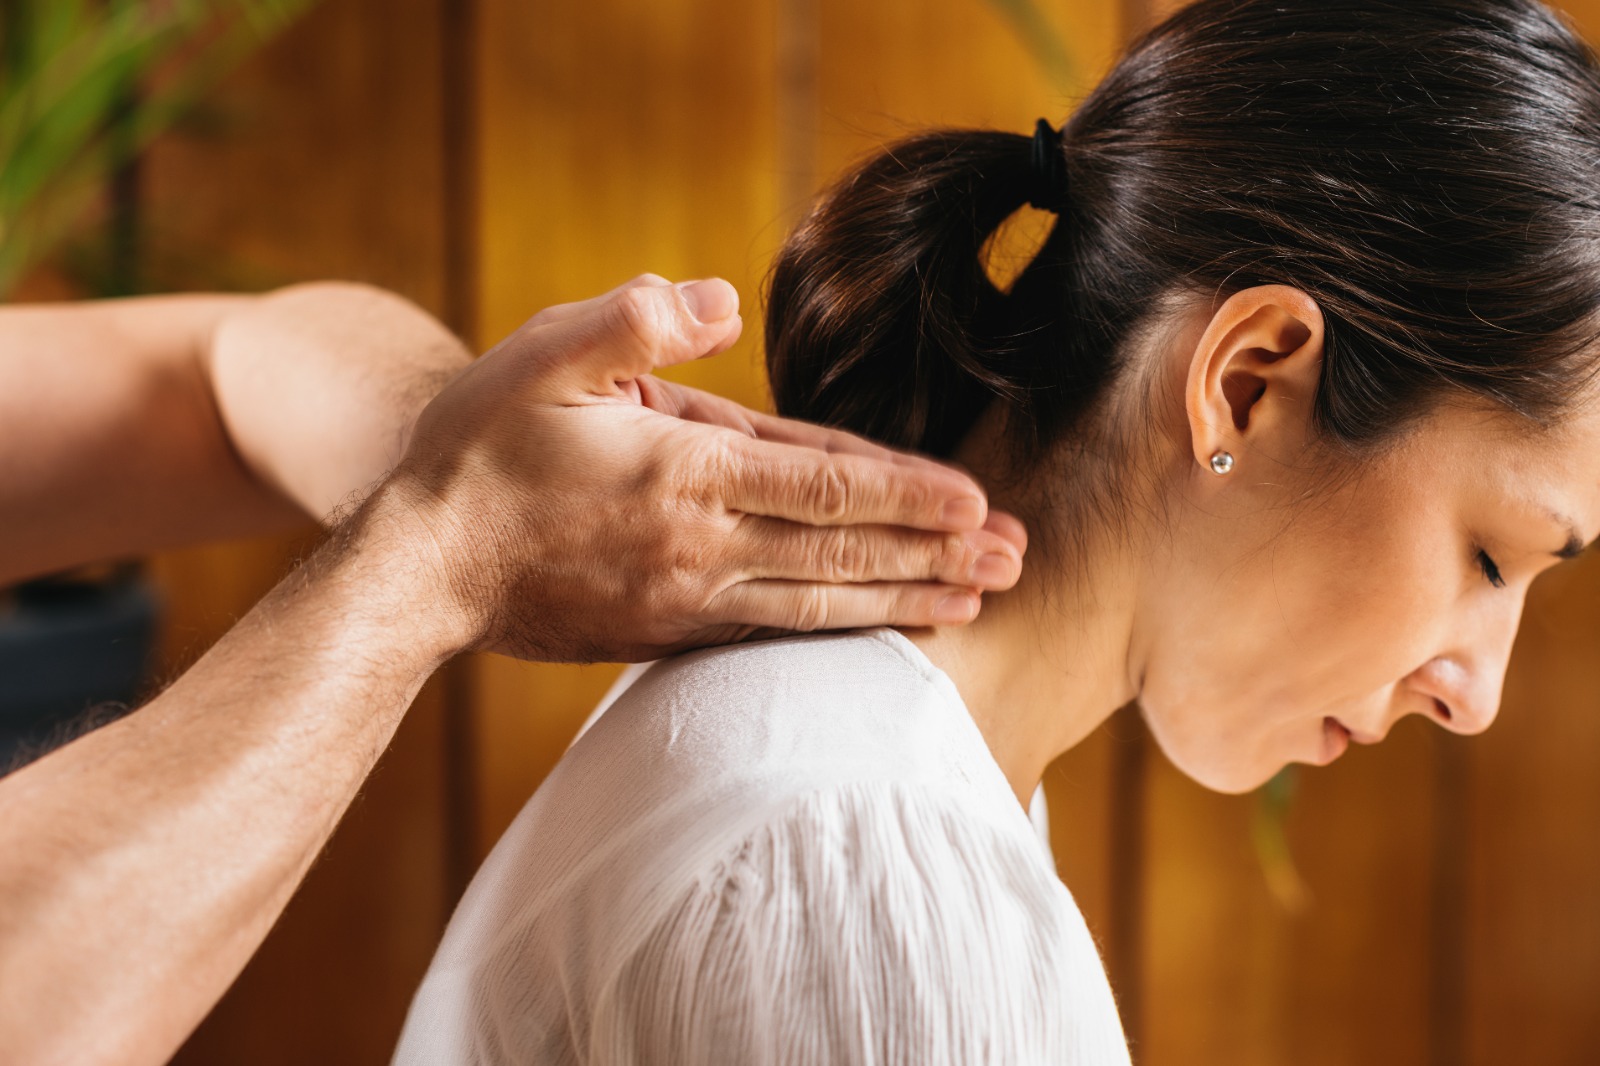 Does a massage help in managing gout pain?